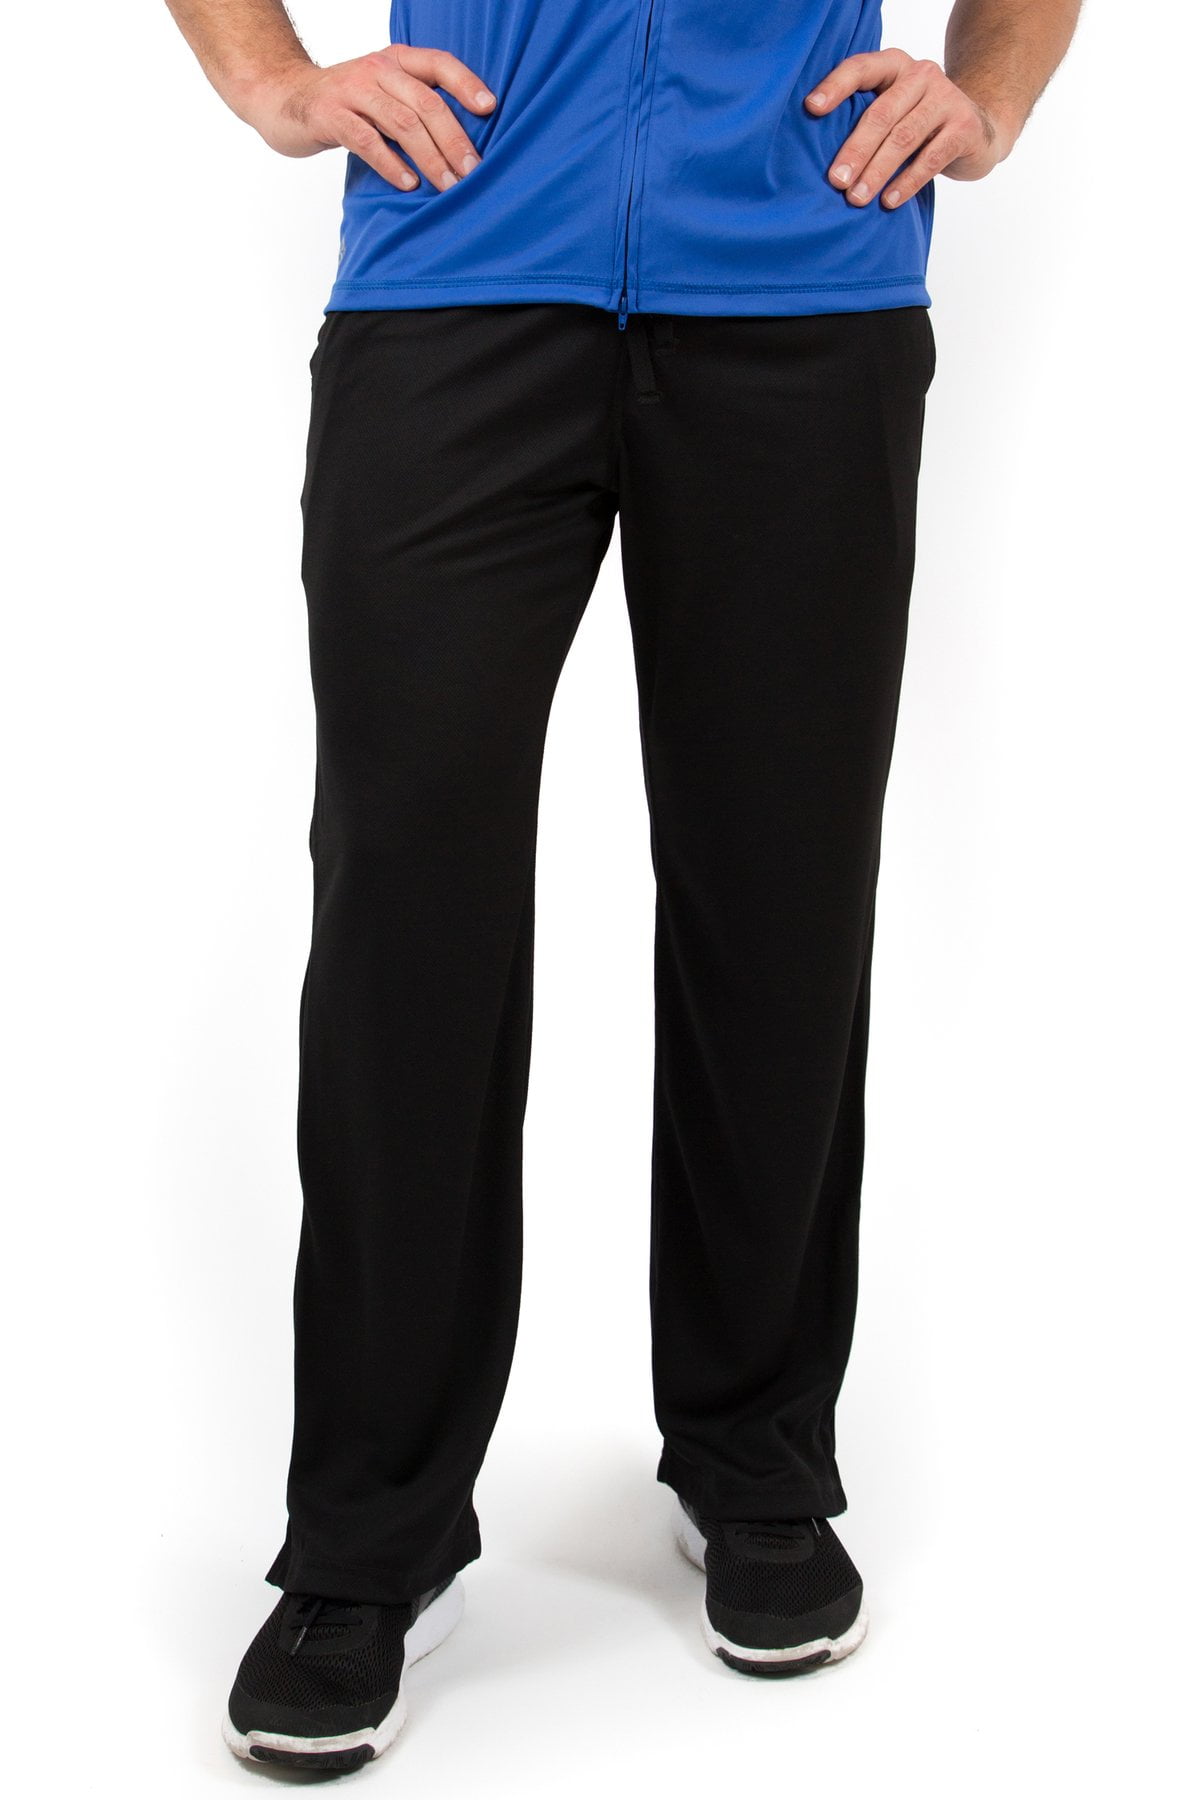 The Greg - Men's Post Surgery Adaptive Pants With Zippers for Easy